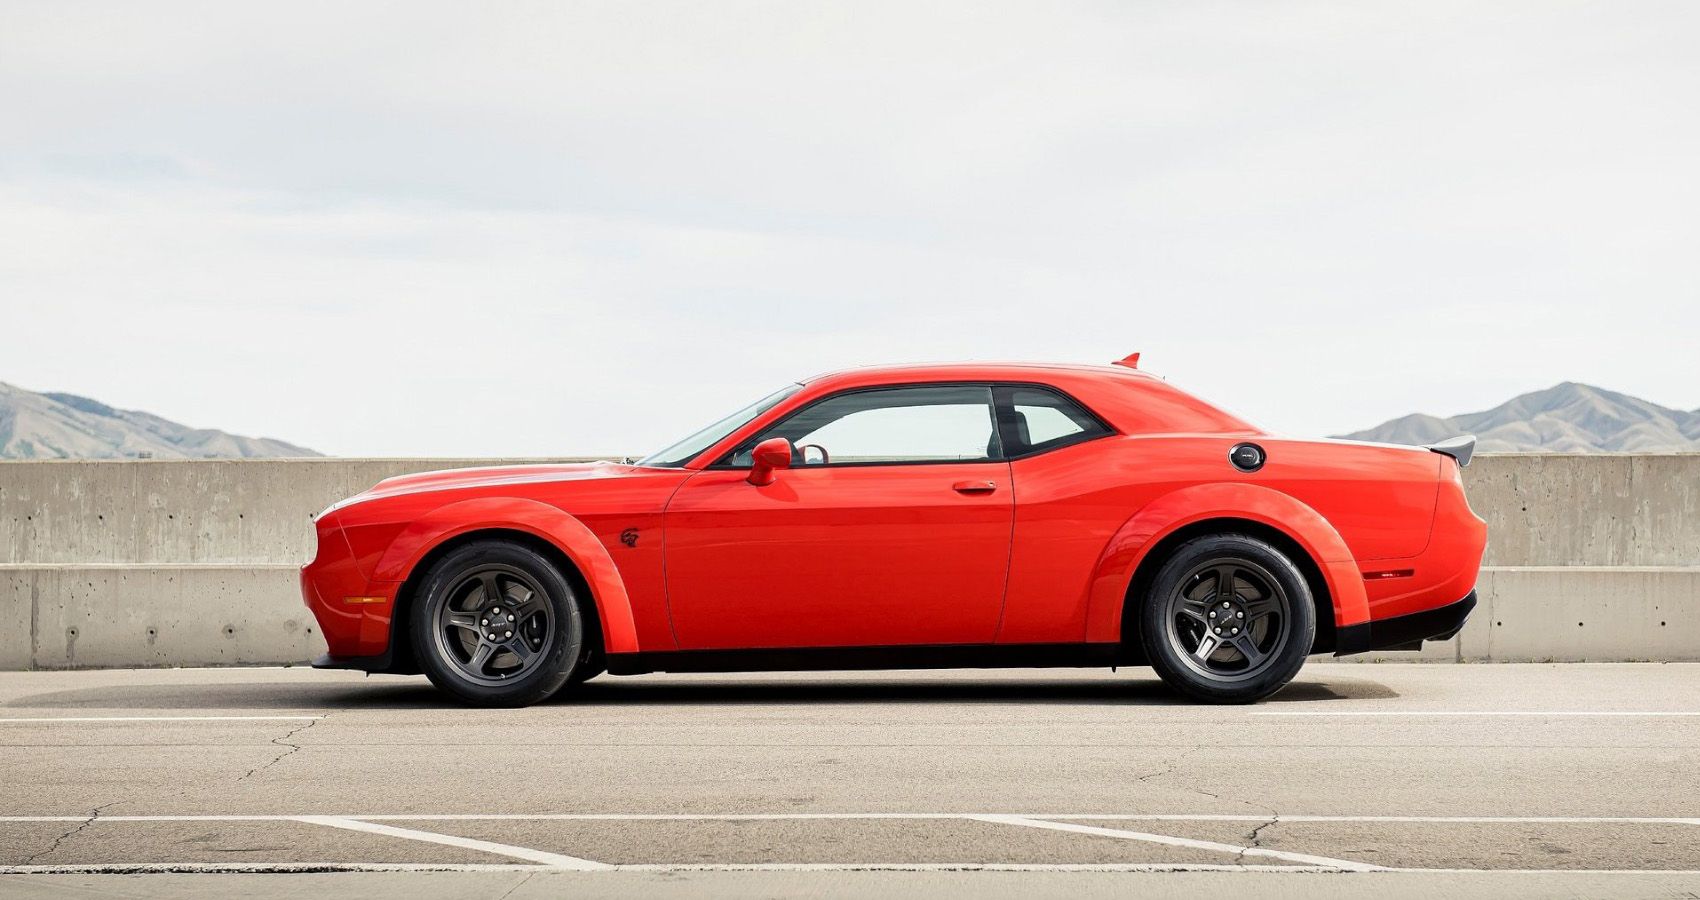 2020 Dodge Challenger SRT Super Stock in red side view